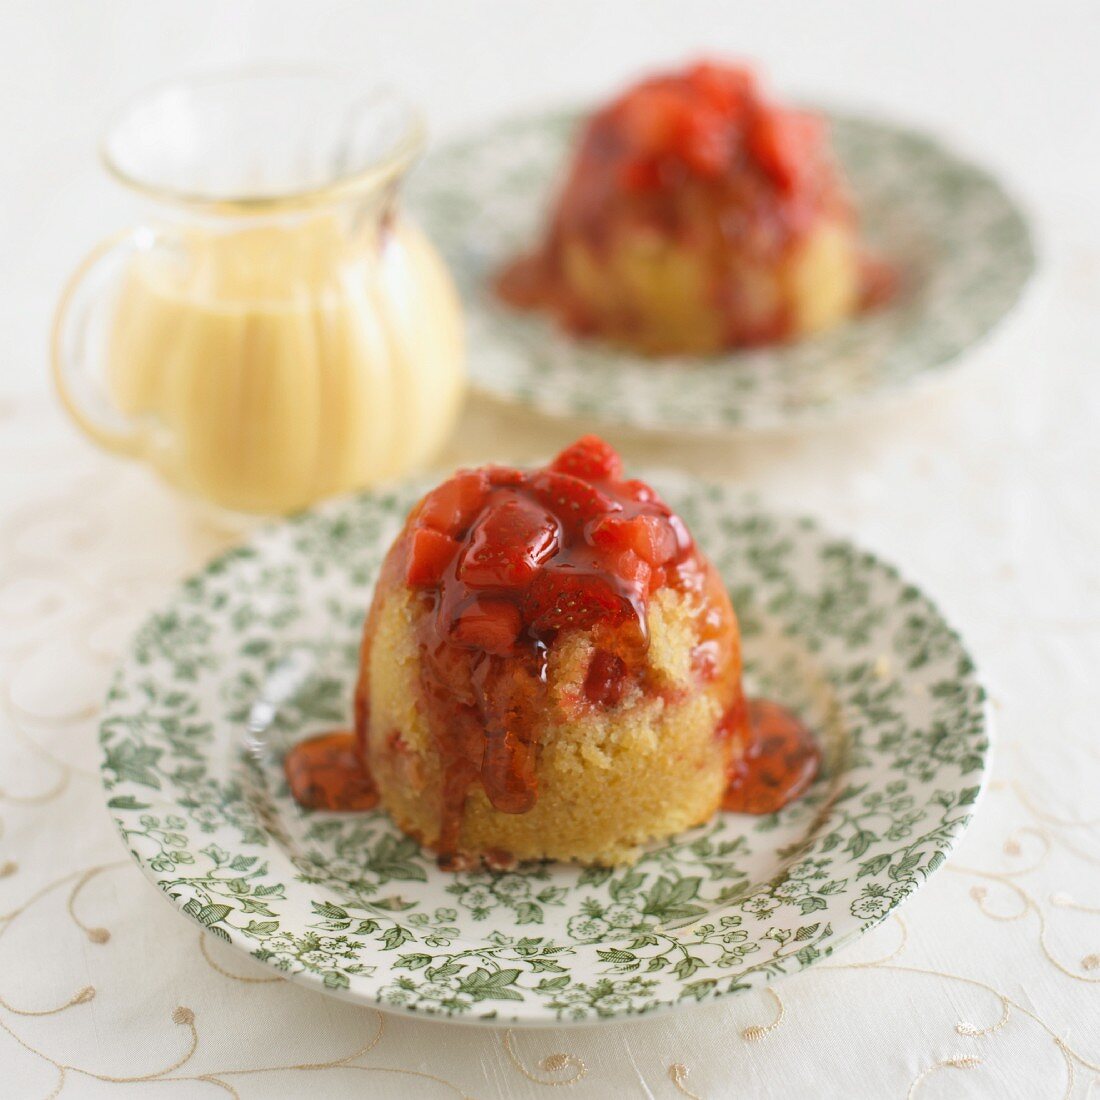 Steamed pudding with strawberries and vanilla sauce